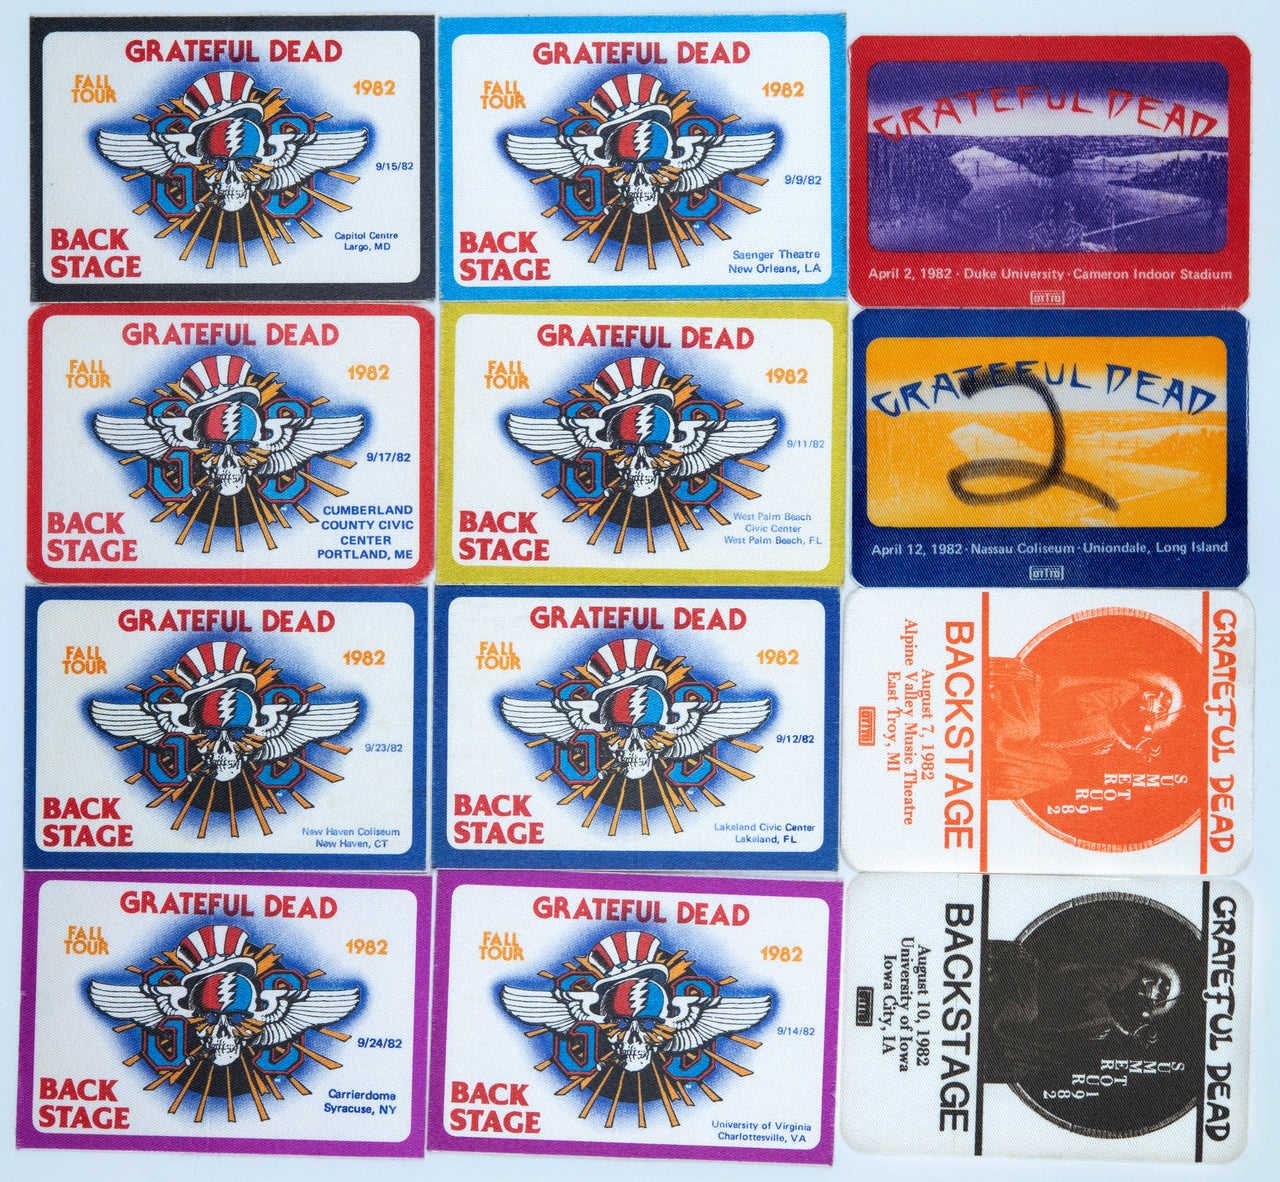 Grateful Dead Backstage Passes (4/2/1982 - 9/24/1982) from Dan Healy